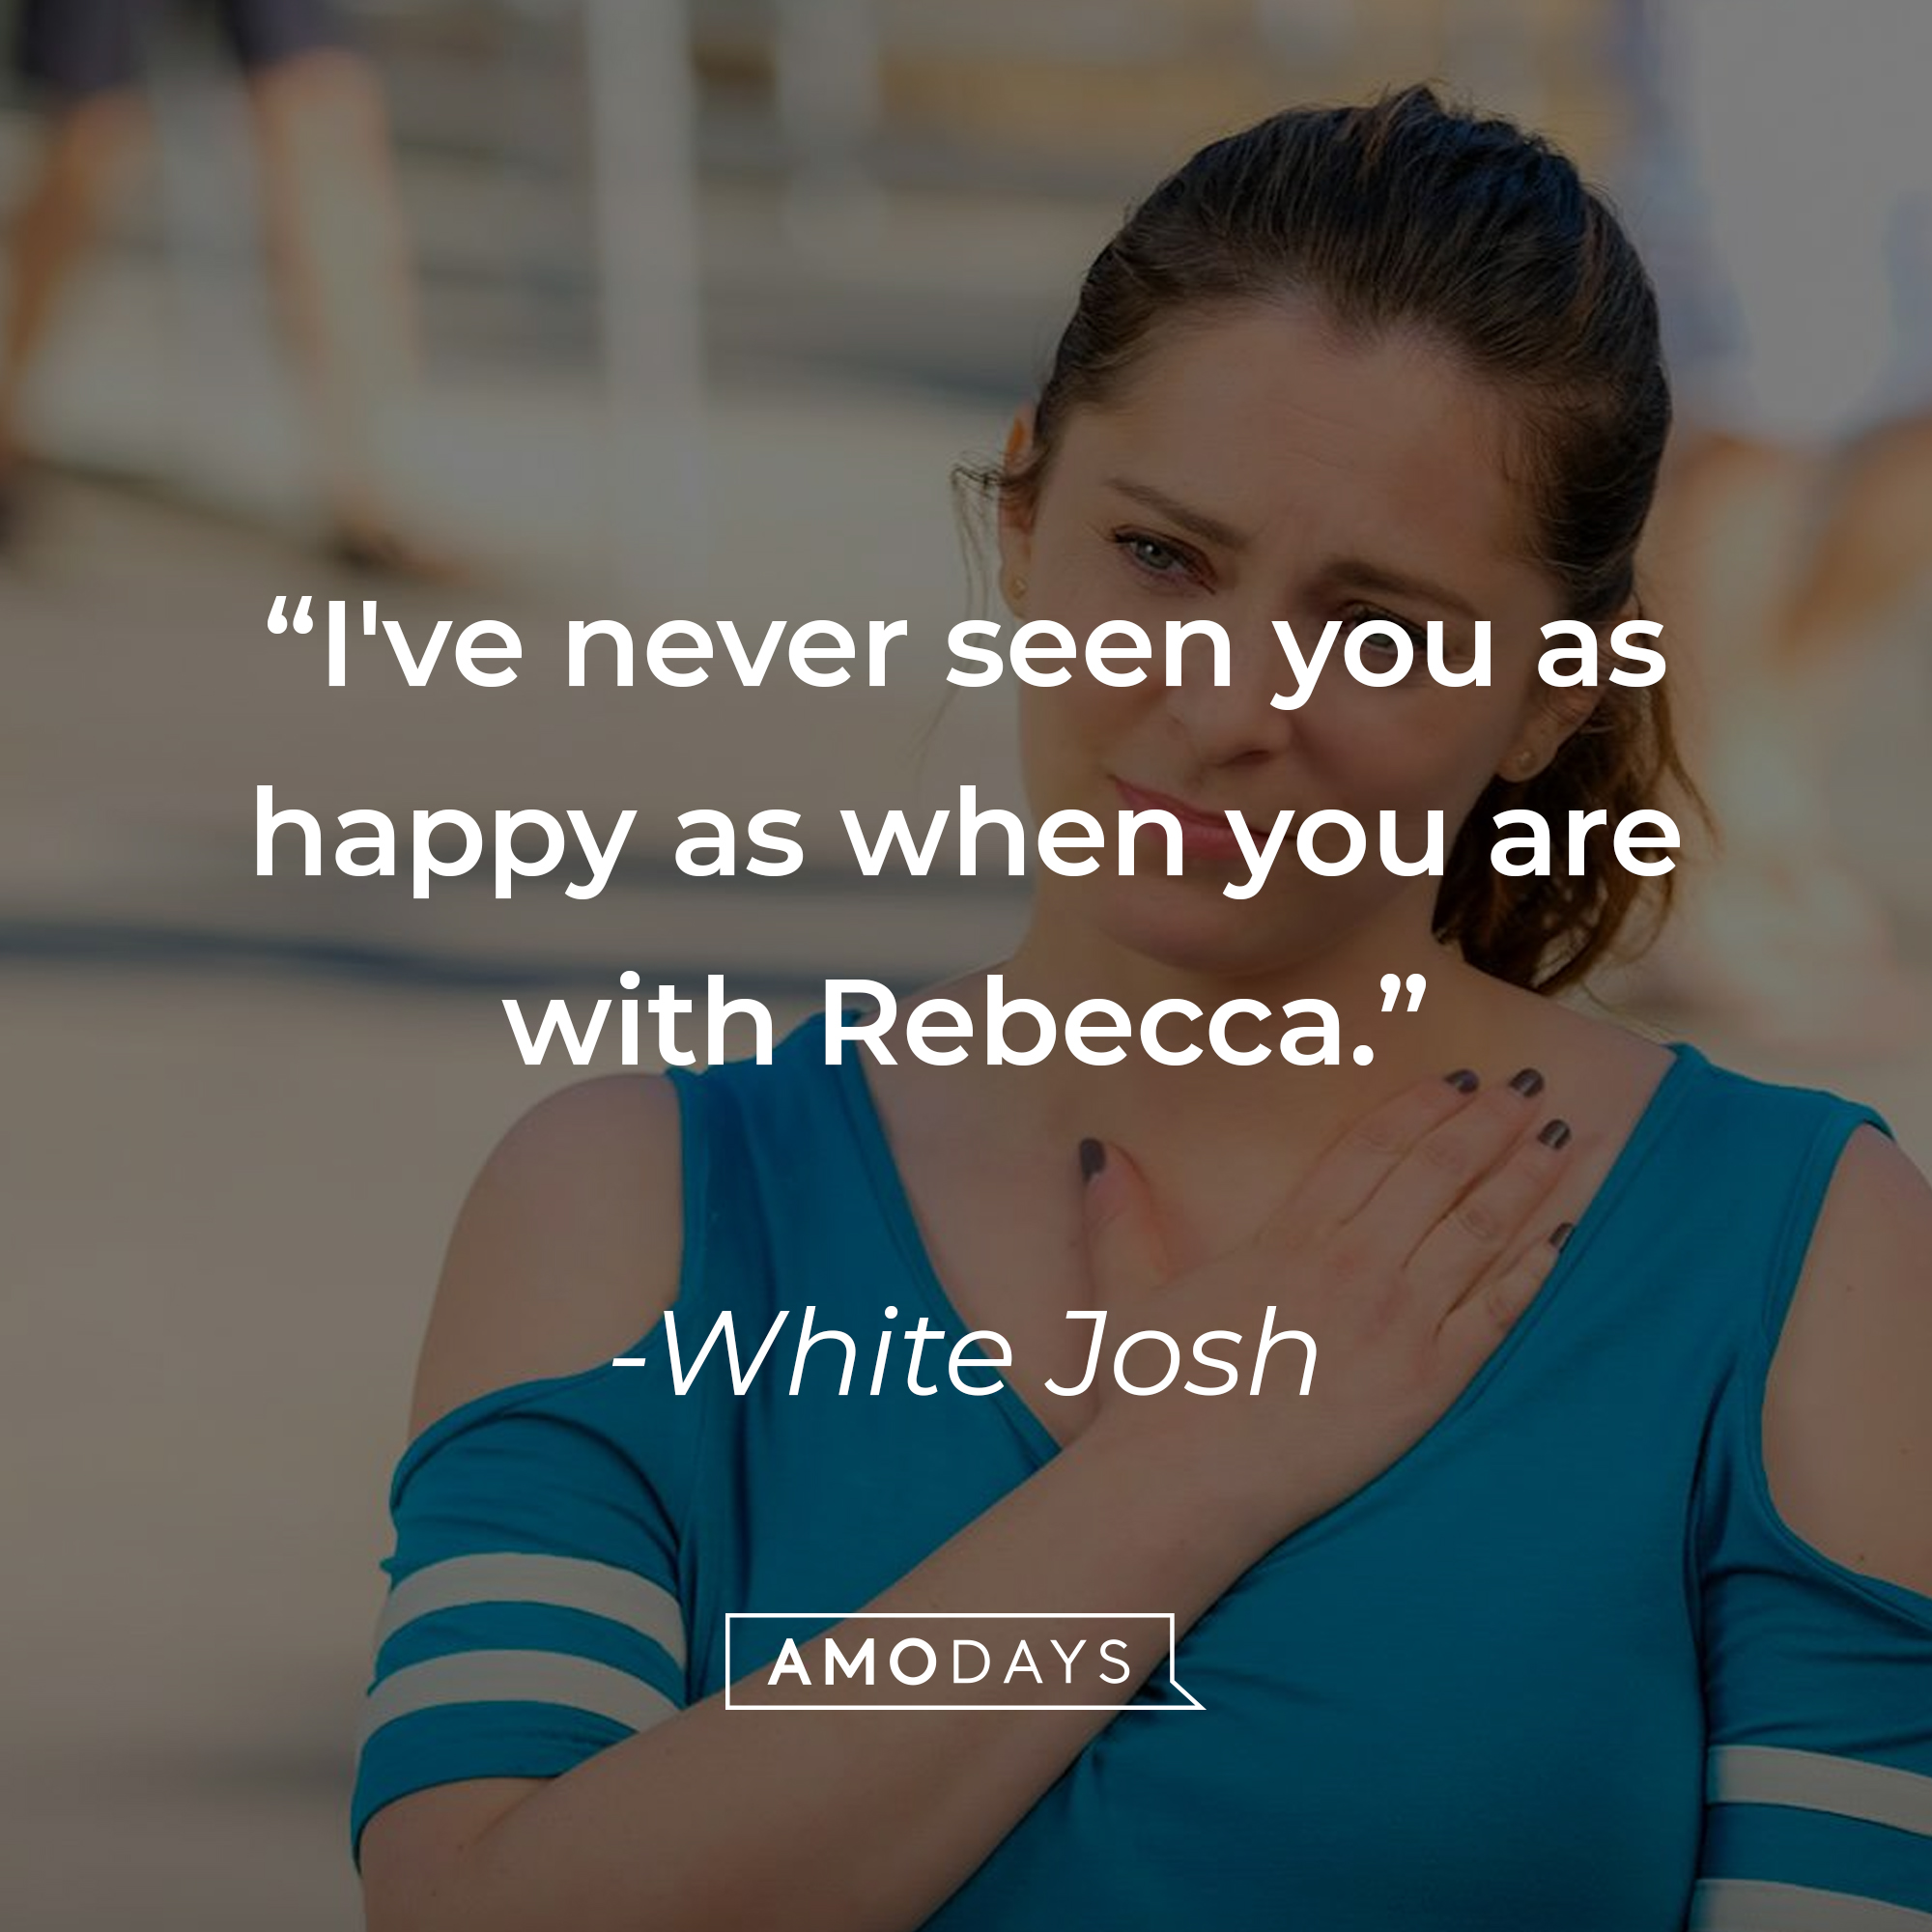 Rebecca, with White Josh’s quote: “I've never seen you as happy as when you are with Rebecca.” |Source: facebook.com/crazyxgf